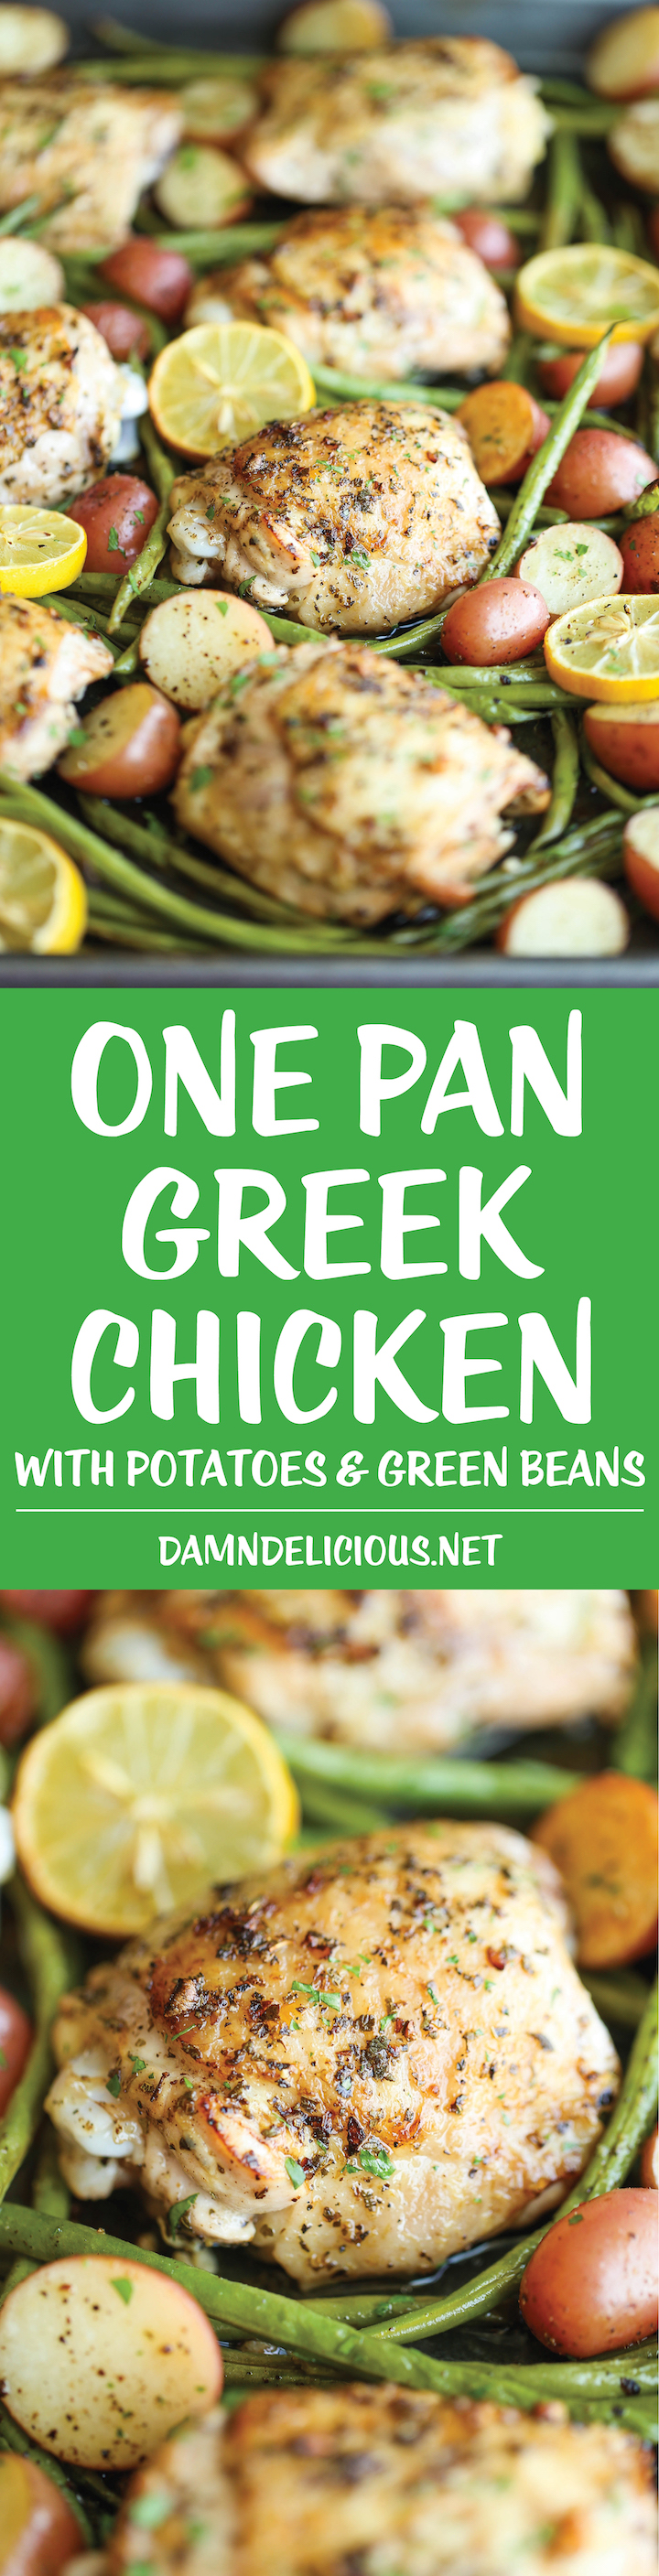 One Pan Greek Chicken - The easiest no-fuss weeknight meal with a simple Greek marinade - all cooked on a single pan with roasted potatoes and green beans!